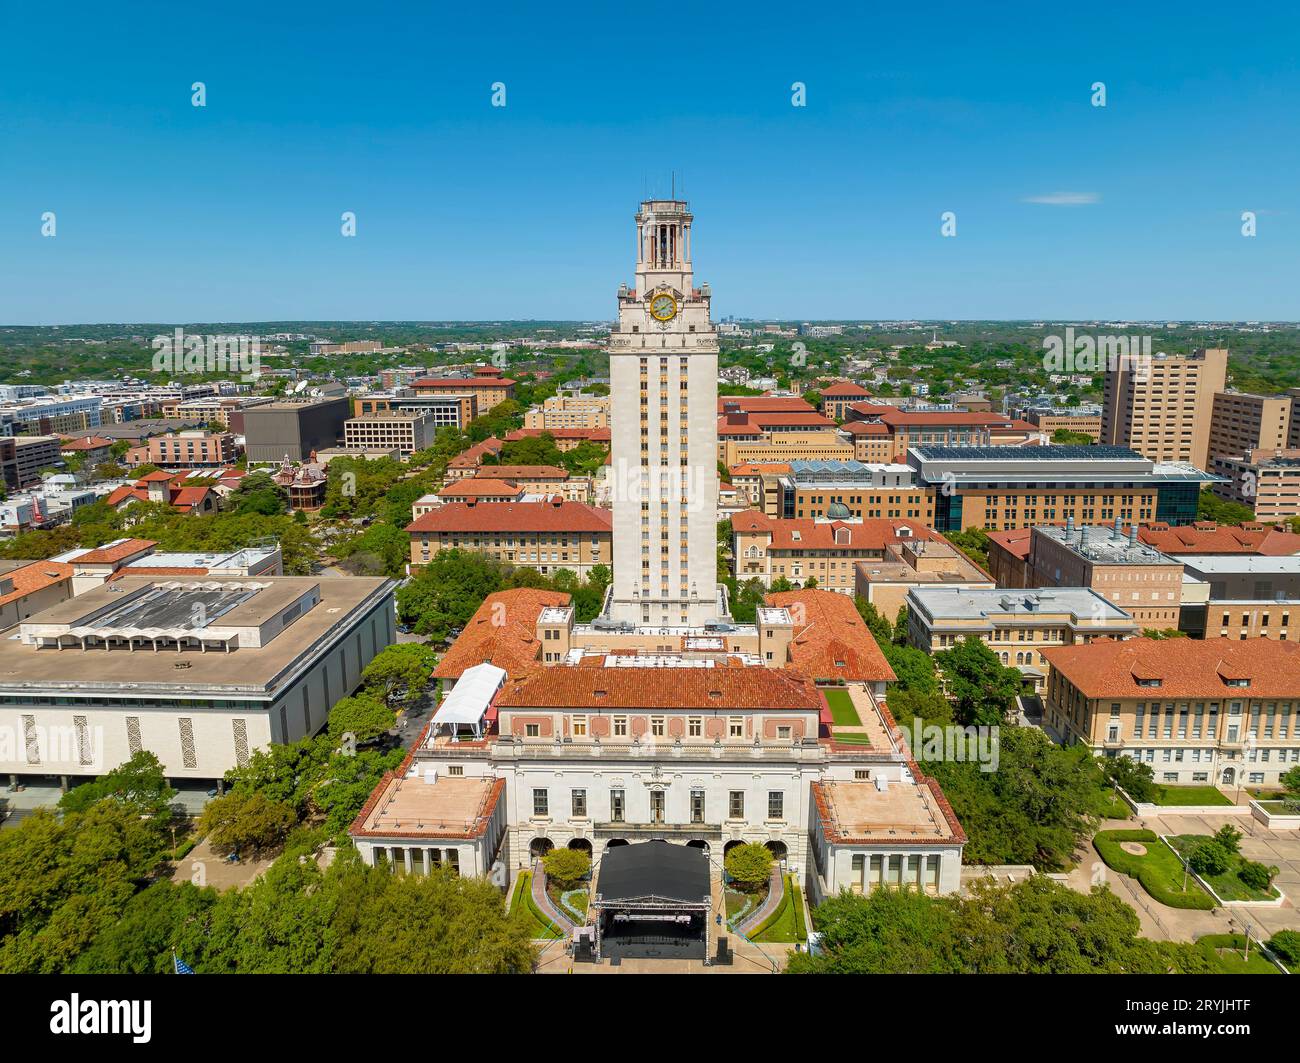 Aerial View Of The Main Building At The University of Texas at Austin Campus Stock Photo